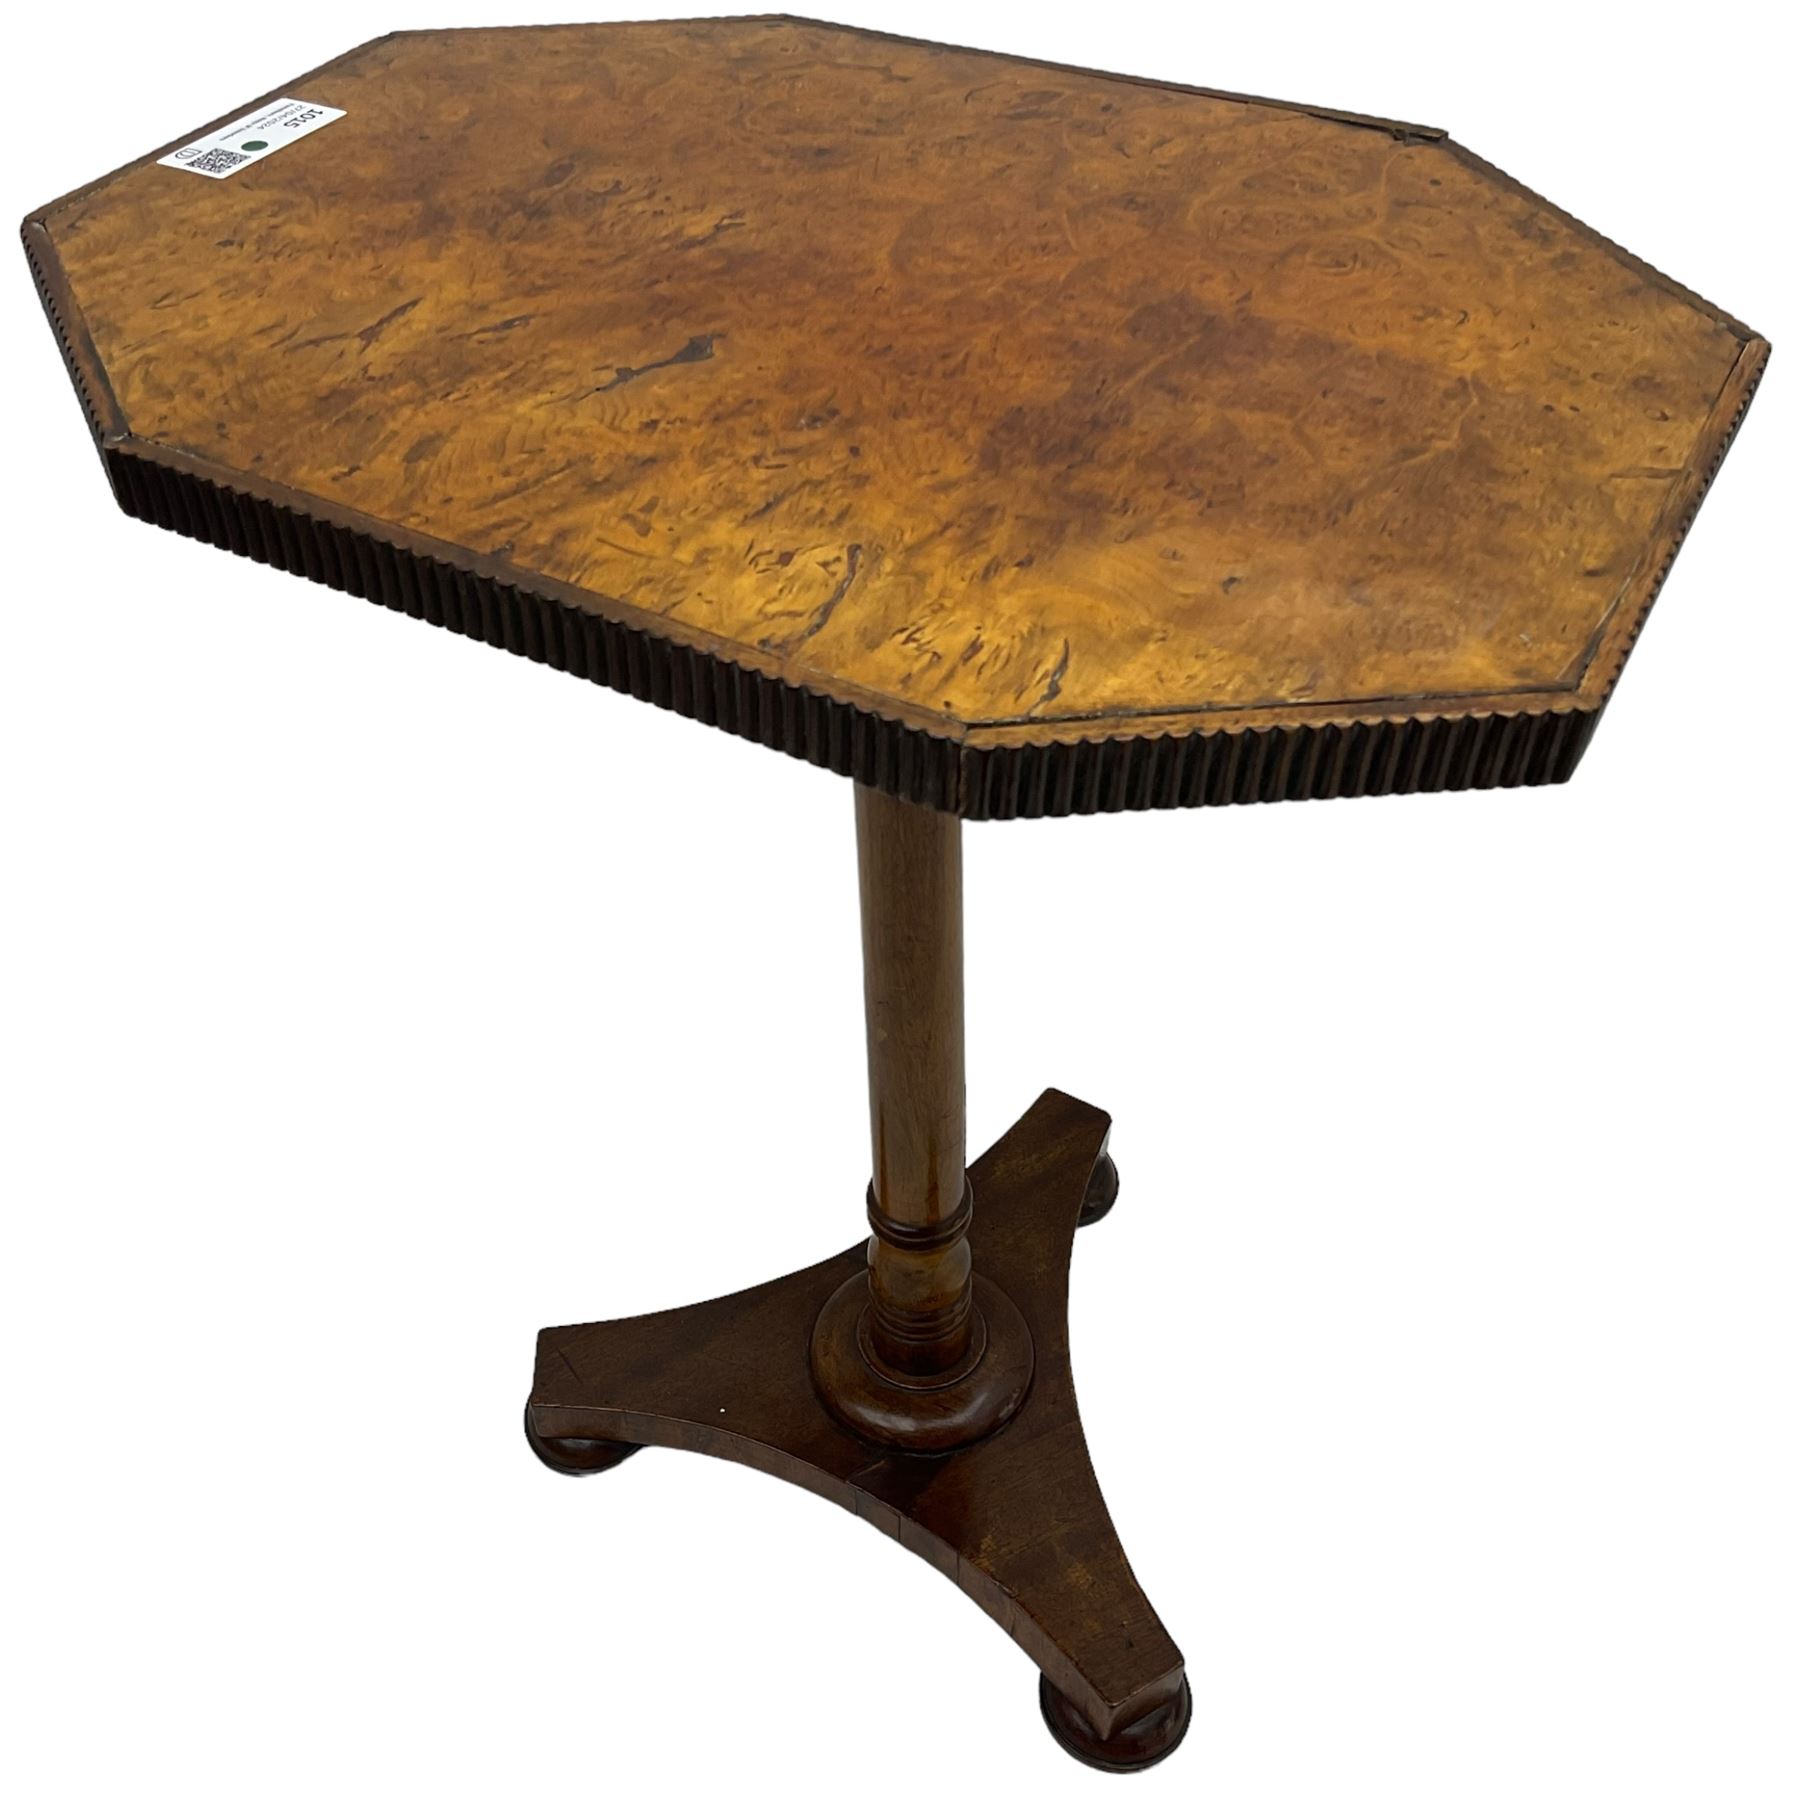 Simkin of London - 19th century figured walnut and mahogany occasional table - Image 2 of 5